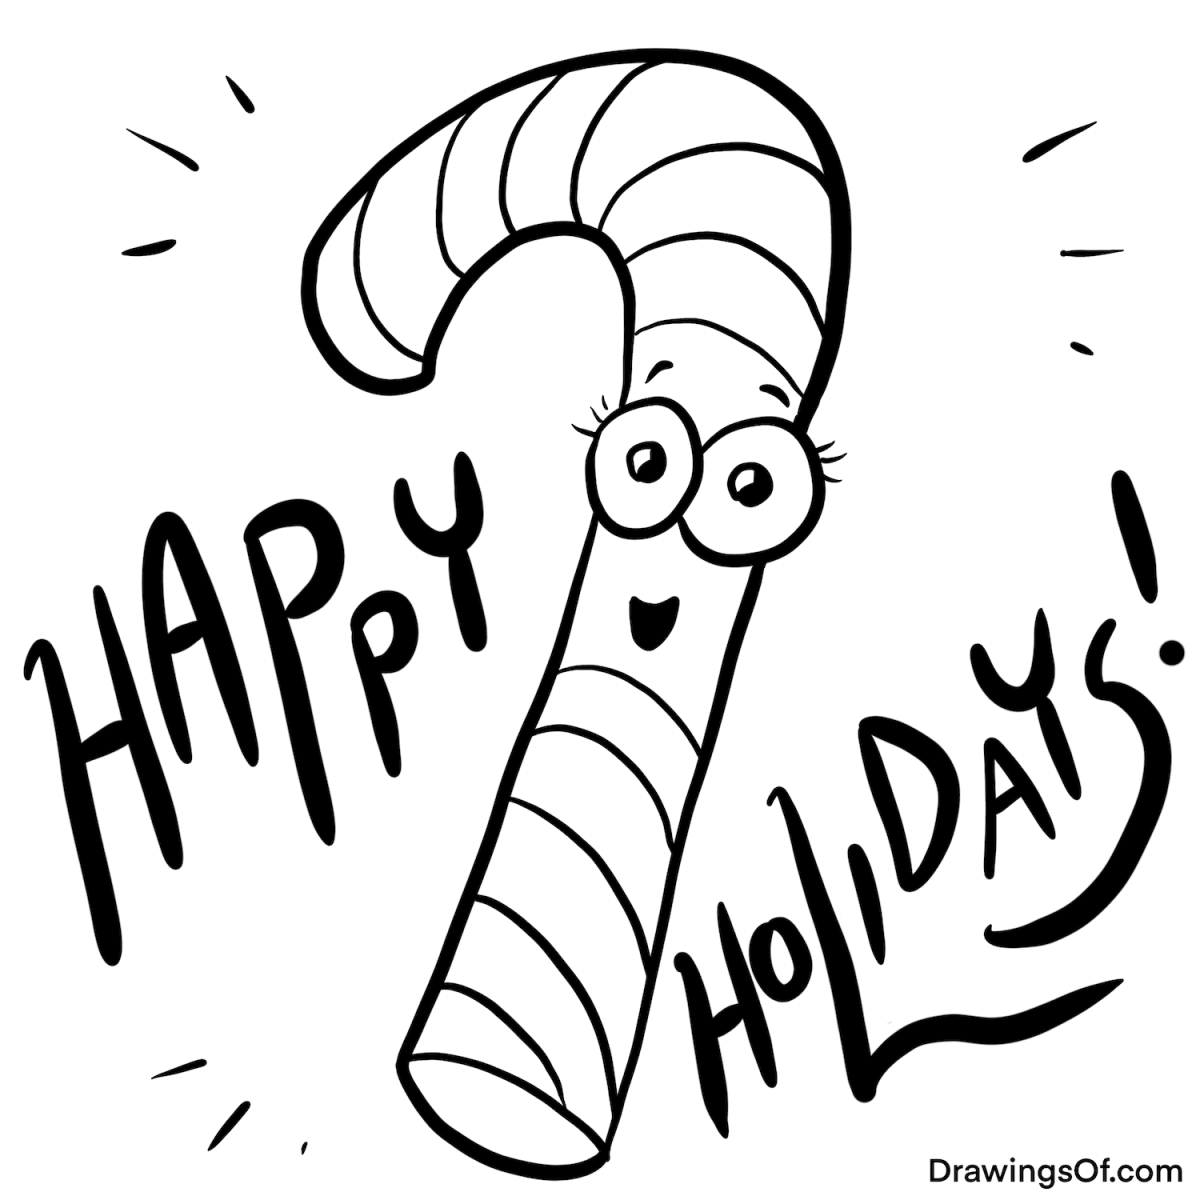 Candy cane drawing easy cute cartoons